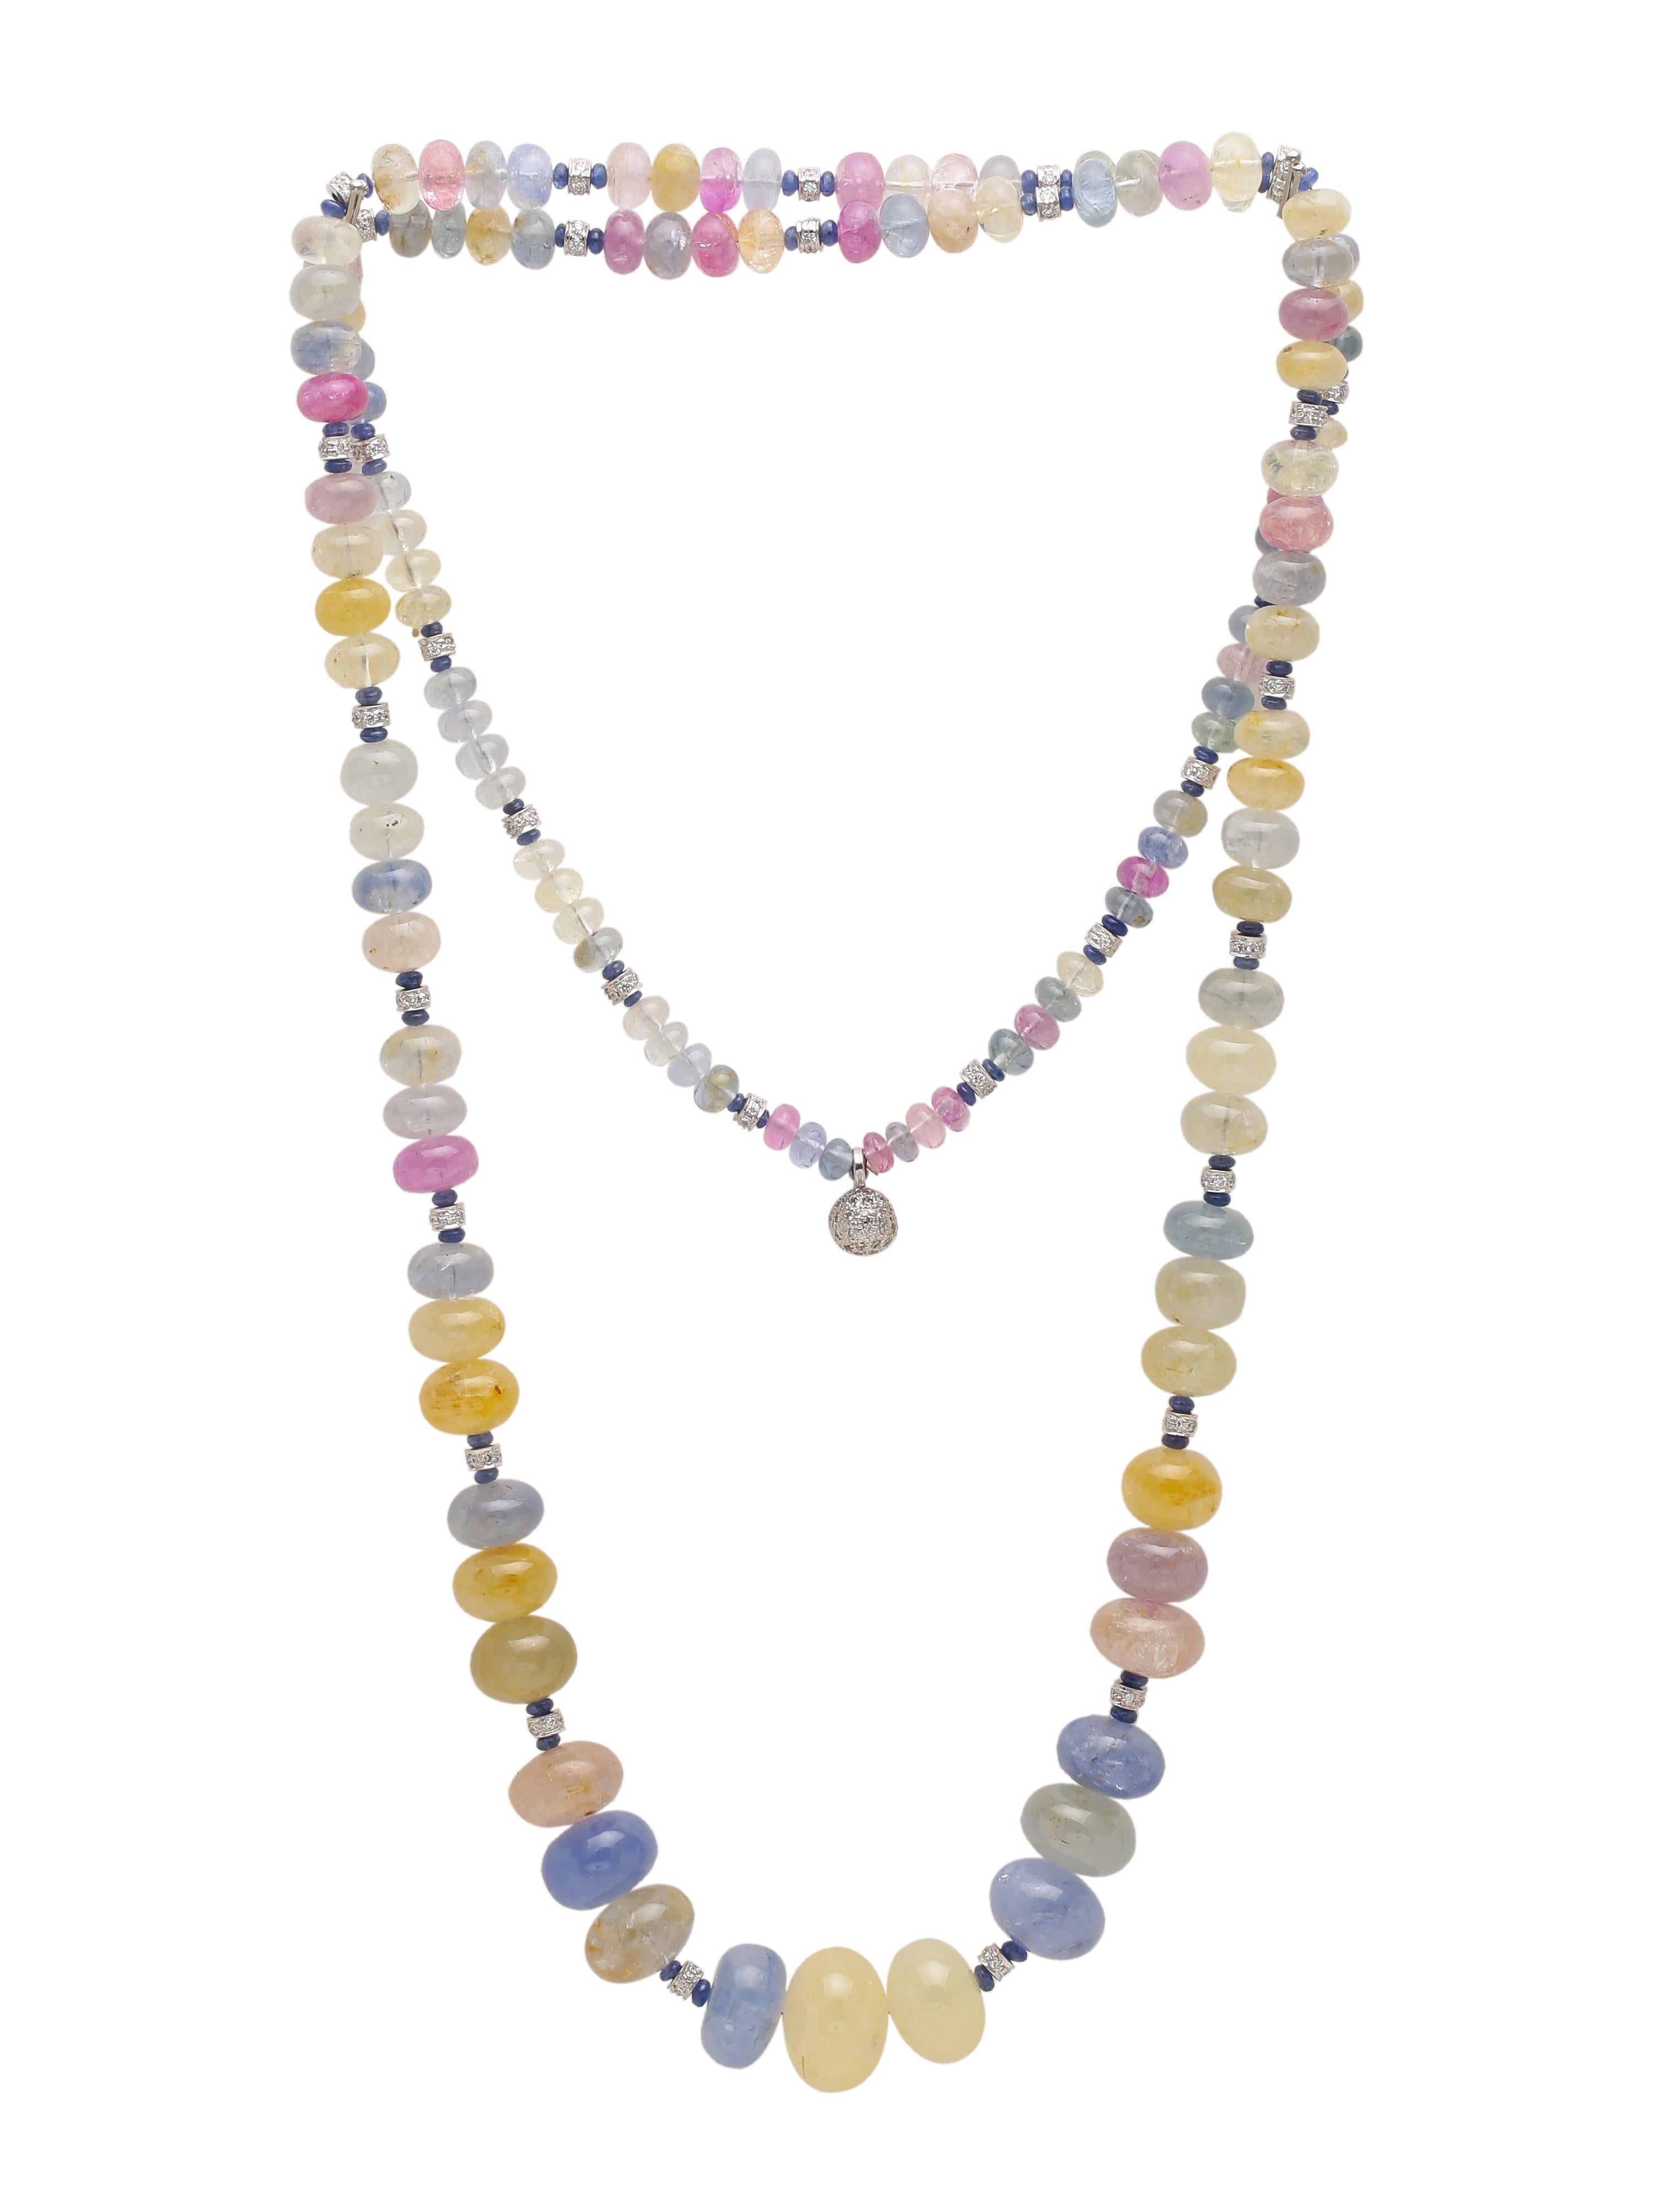 A Beautiful necklace with Natural Multi Color Sapphires graduating in size. You will also notice some Gold and Diamond Rhondells in the middle of the beads which adds some diamond glitter to the necklace.
The different colors of sapphire were made